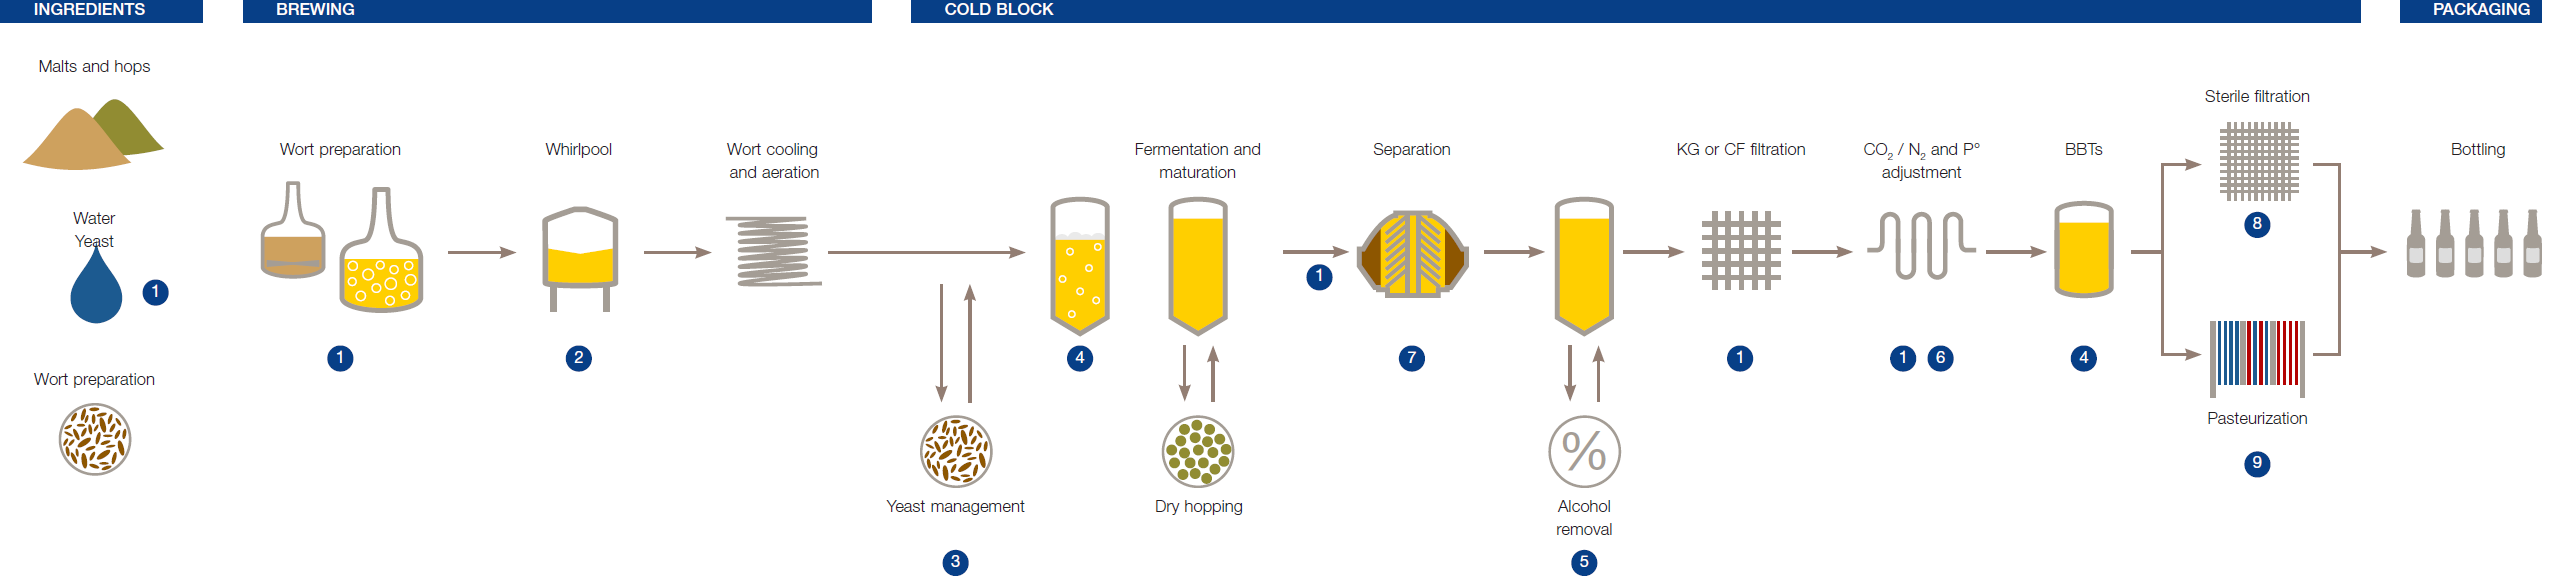 craft beer production process chart